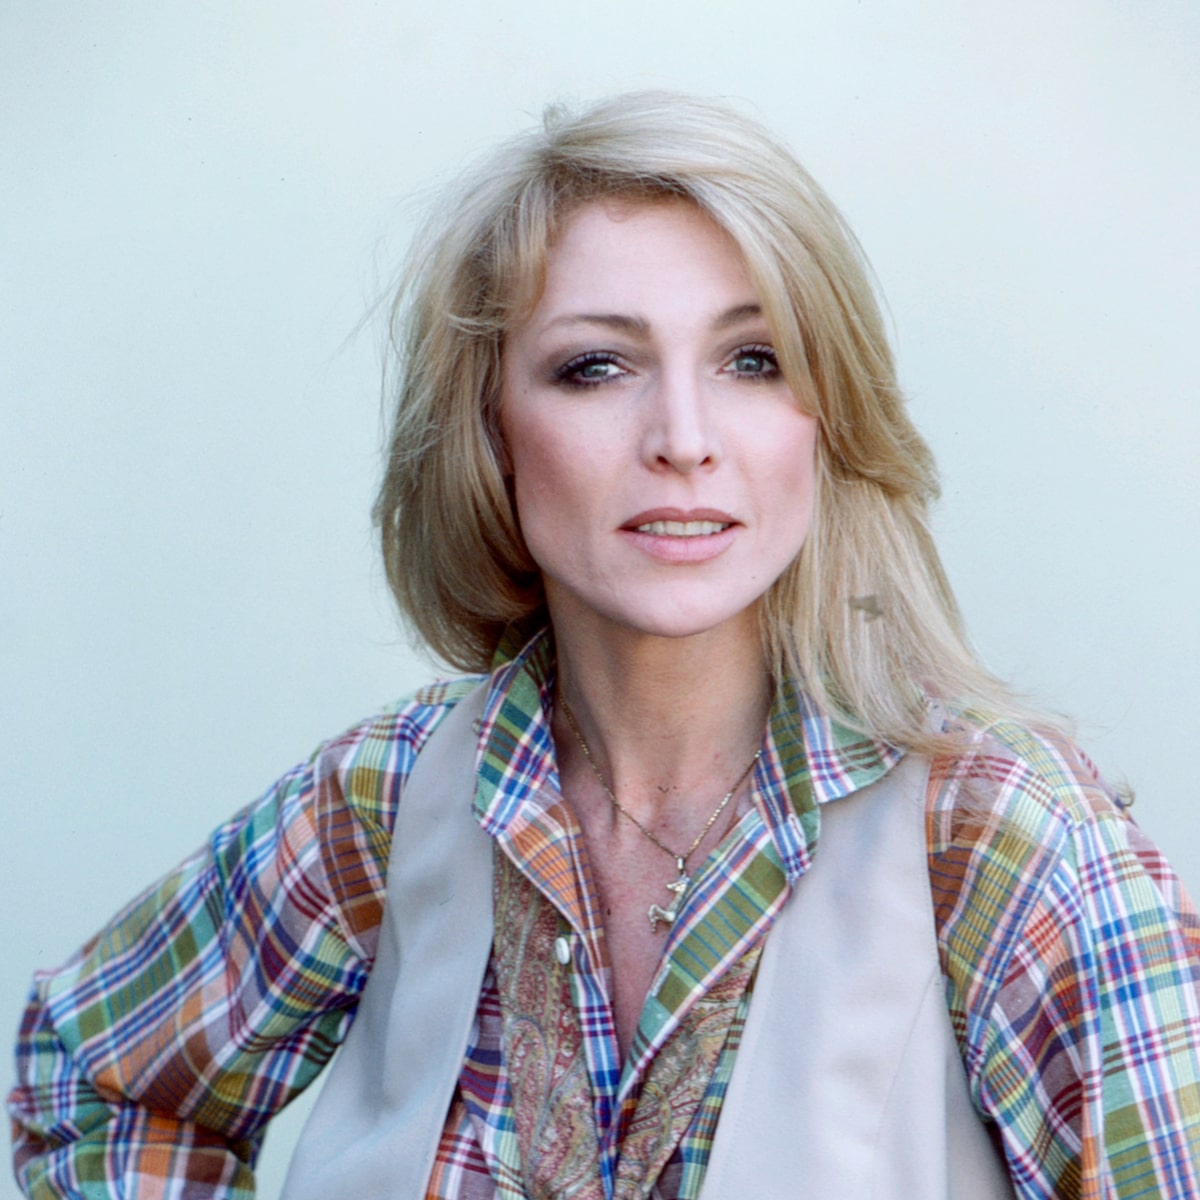 Joanna Pettet wearing colorful shirt with blond hair and a golden necklace